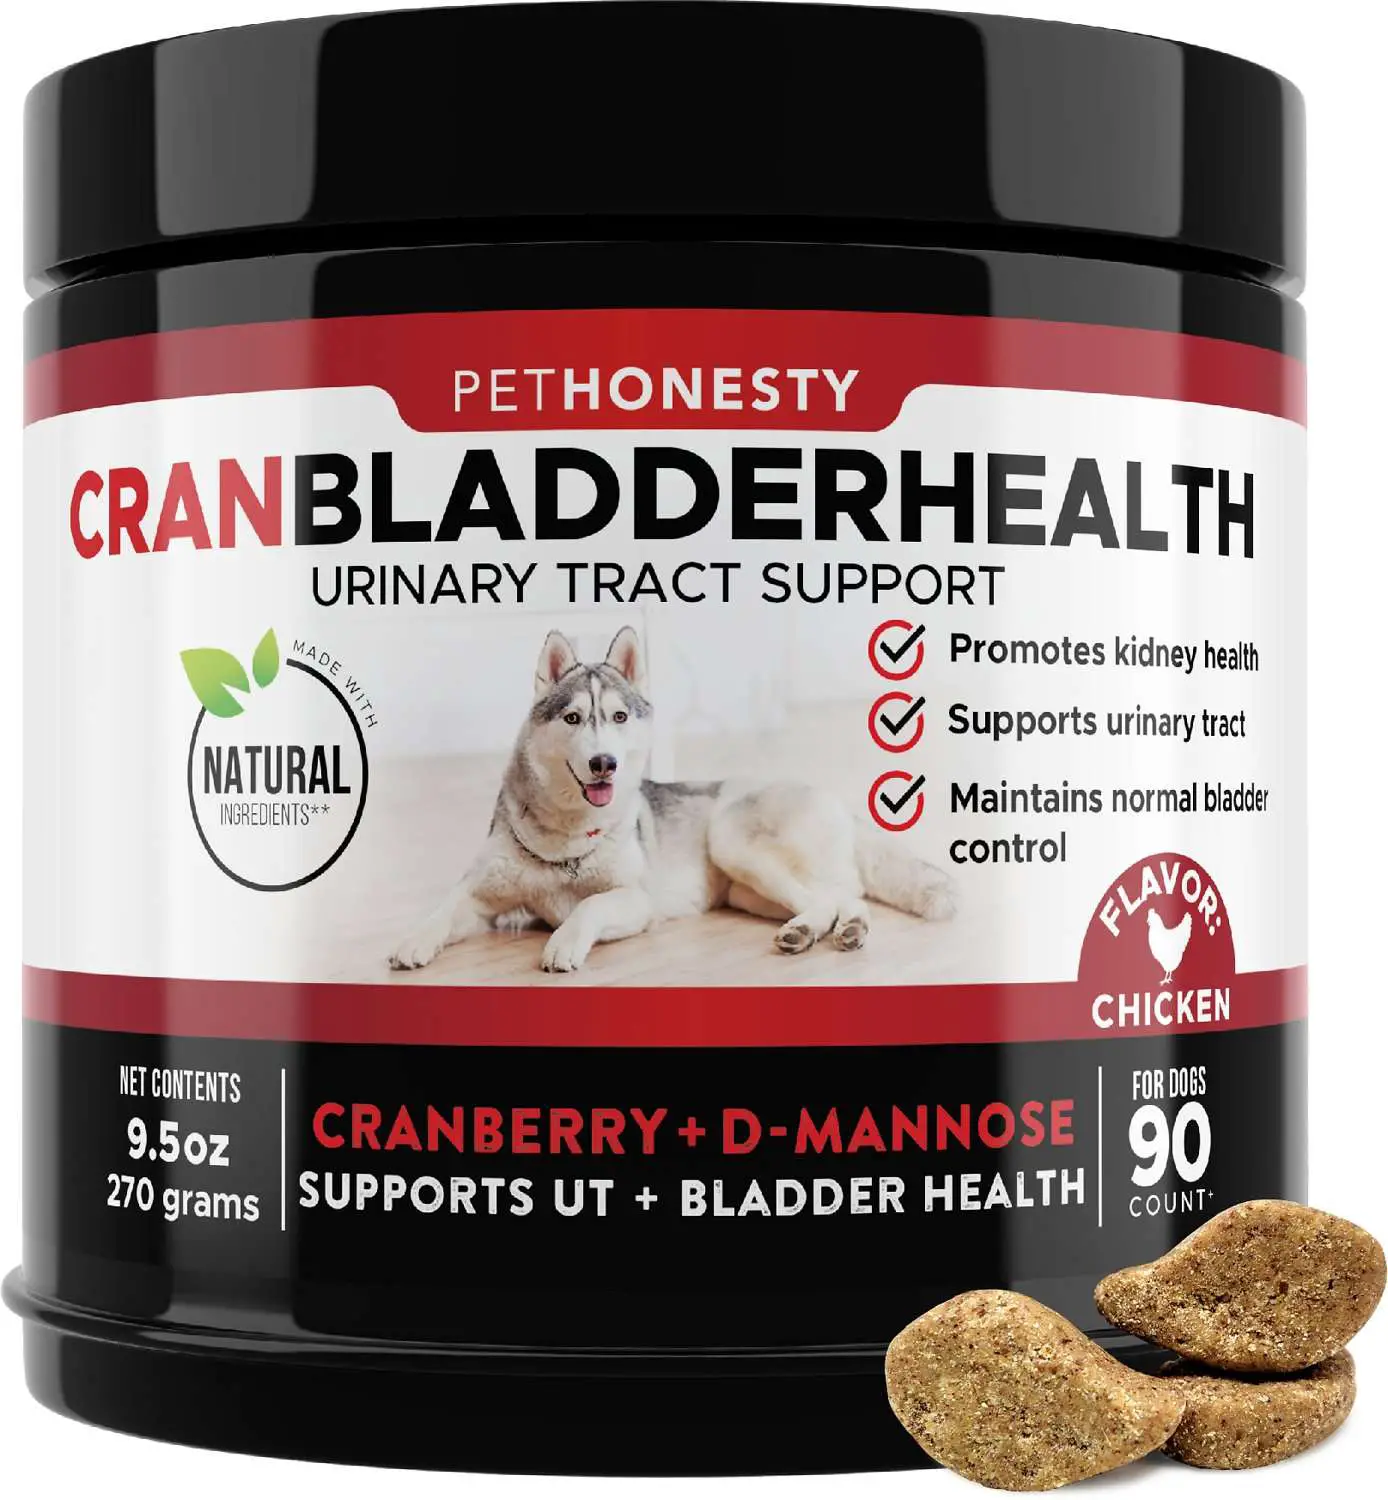 Can You Give A Dog Cranberry Pills For Uti